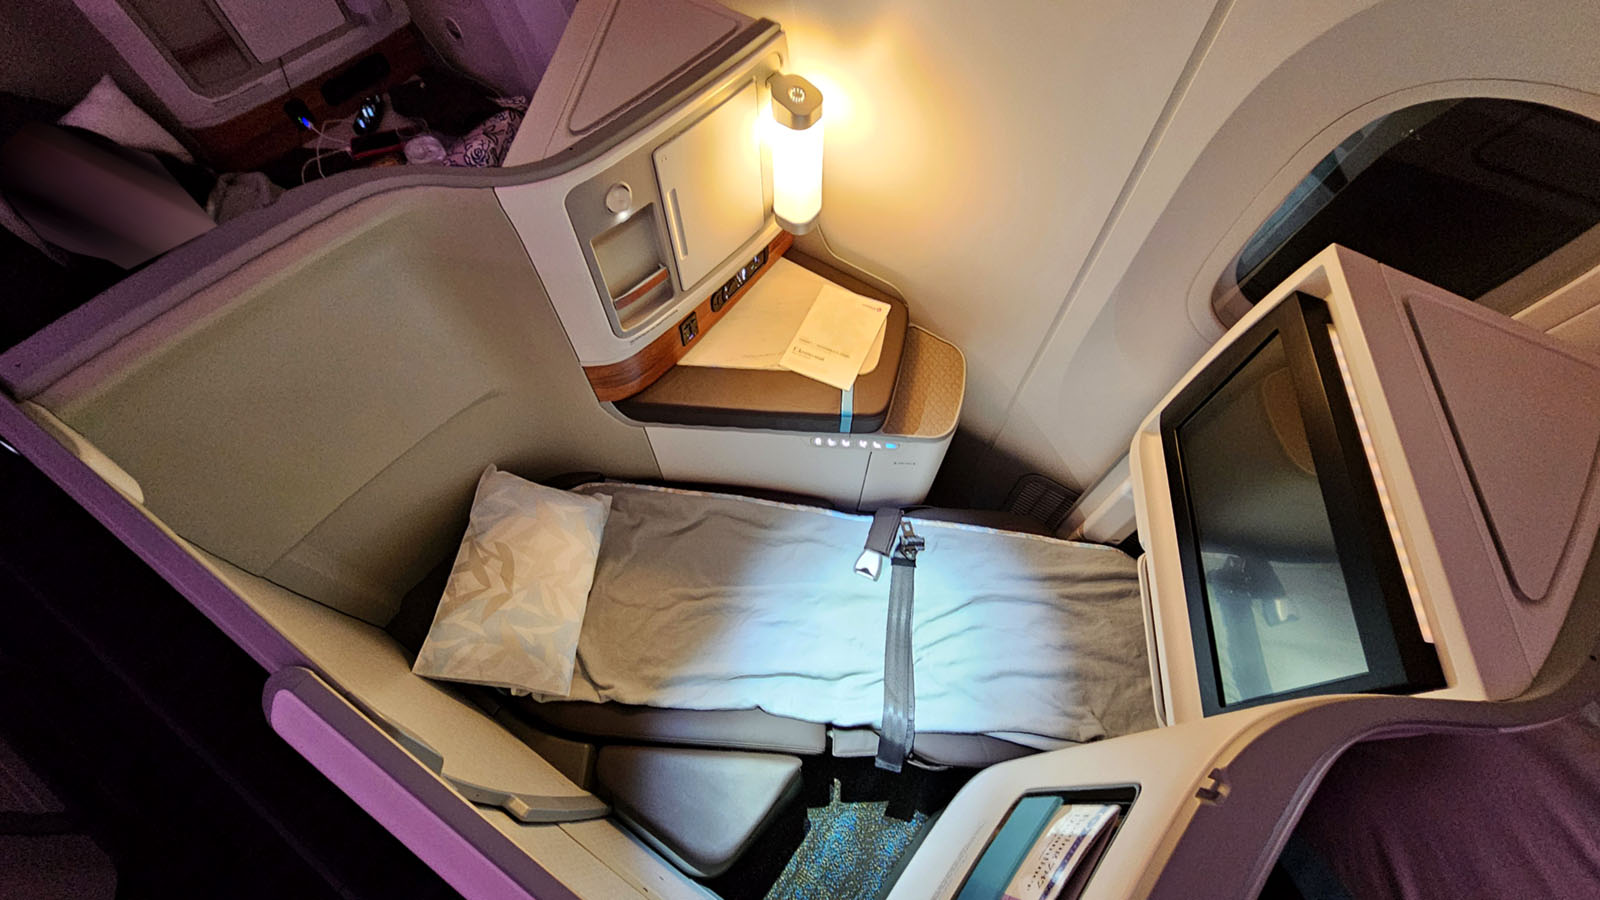 Bedding on Hawaiian Airlines' new premium aircract